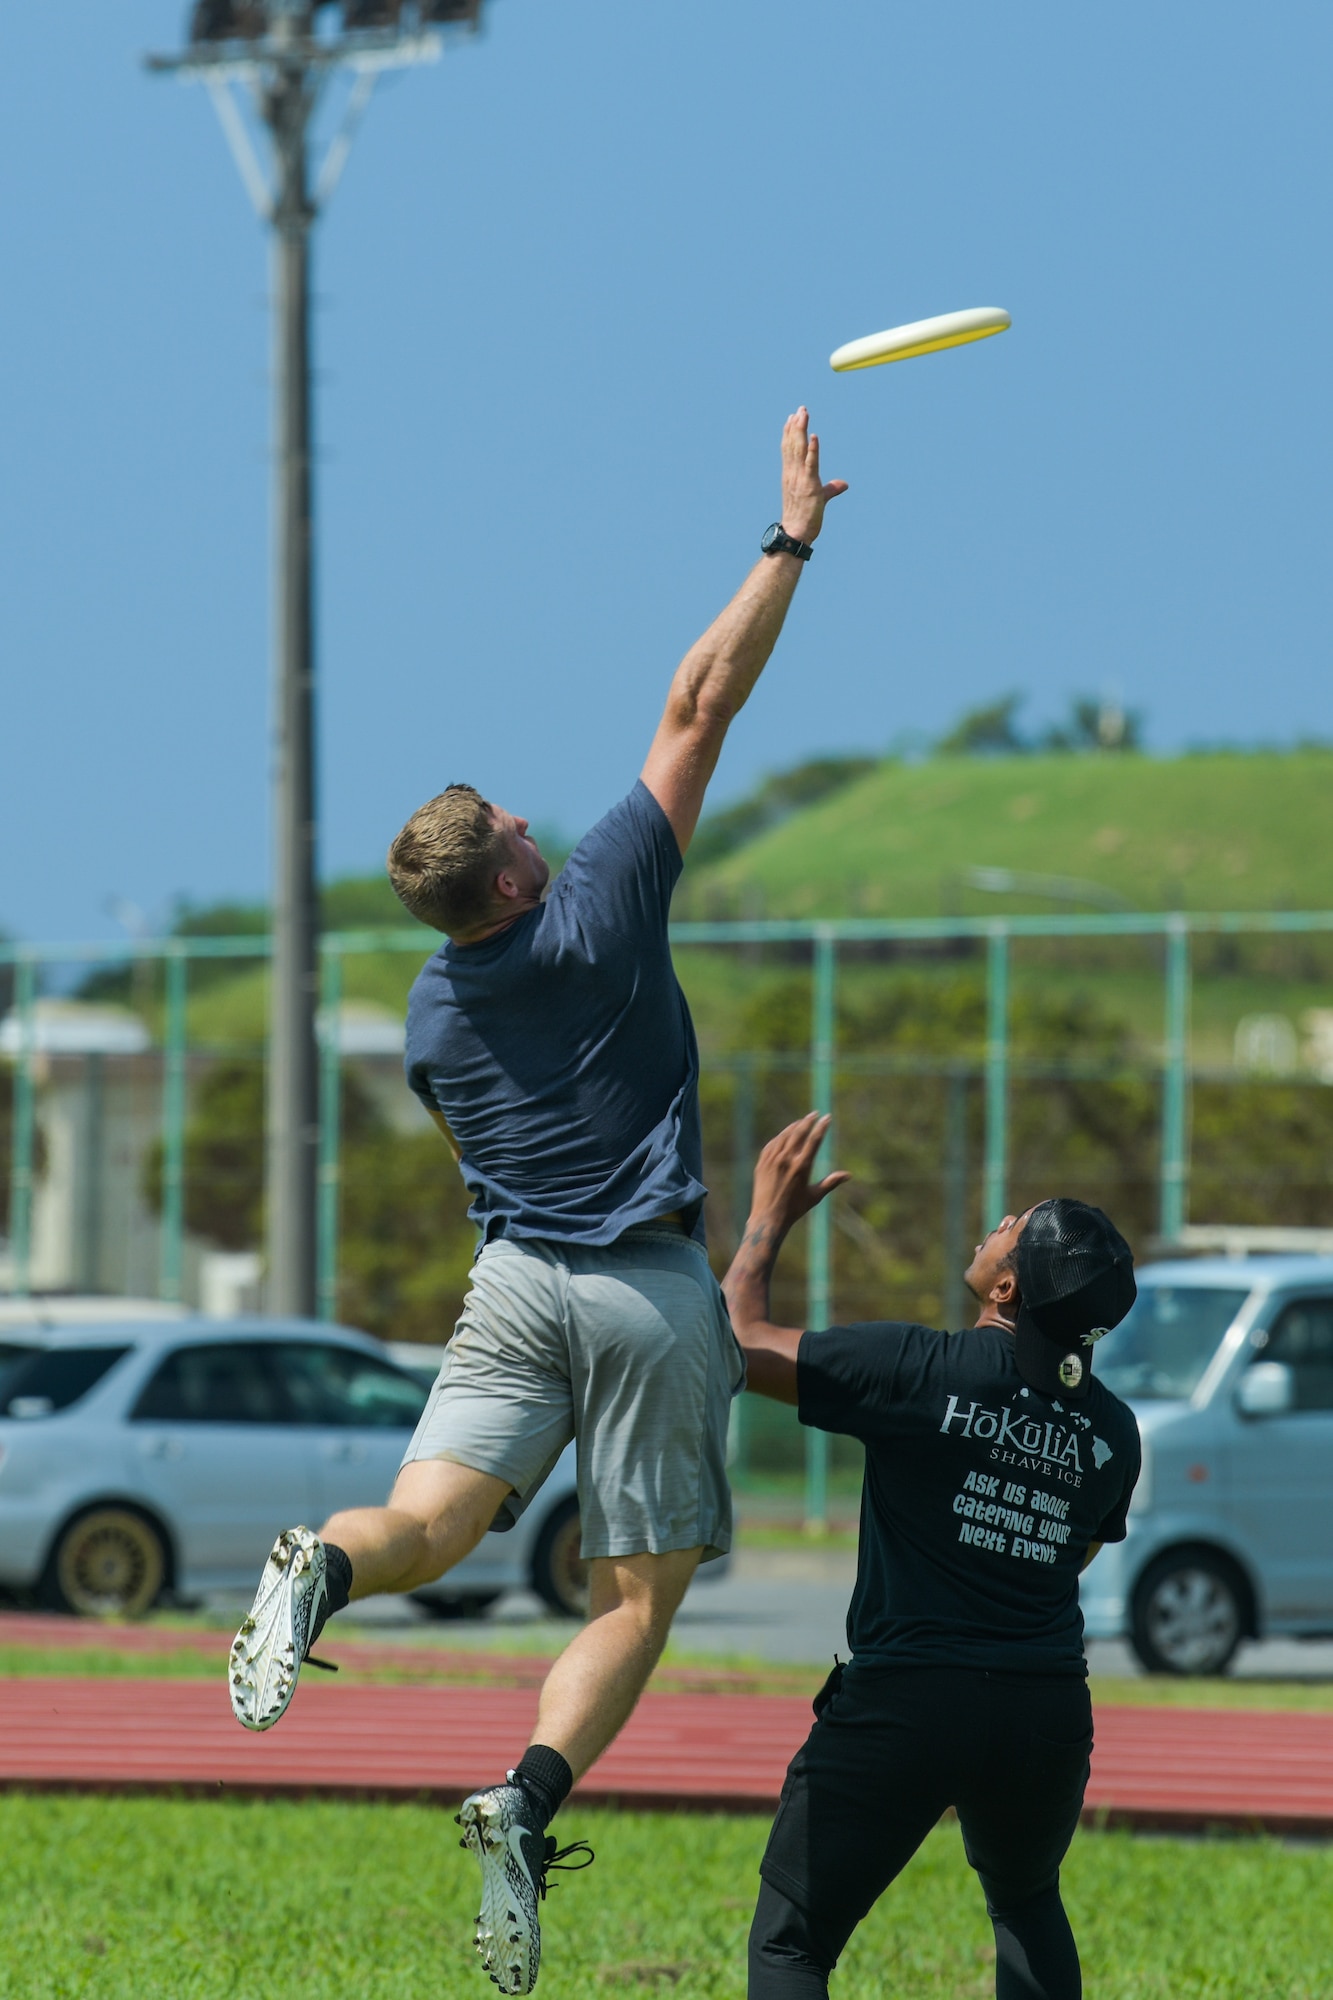 Airmen try to catch a frisbee during a game.